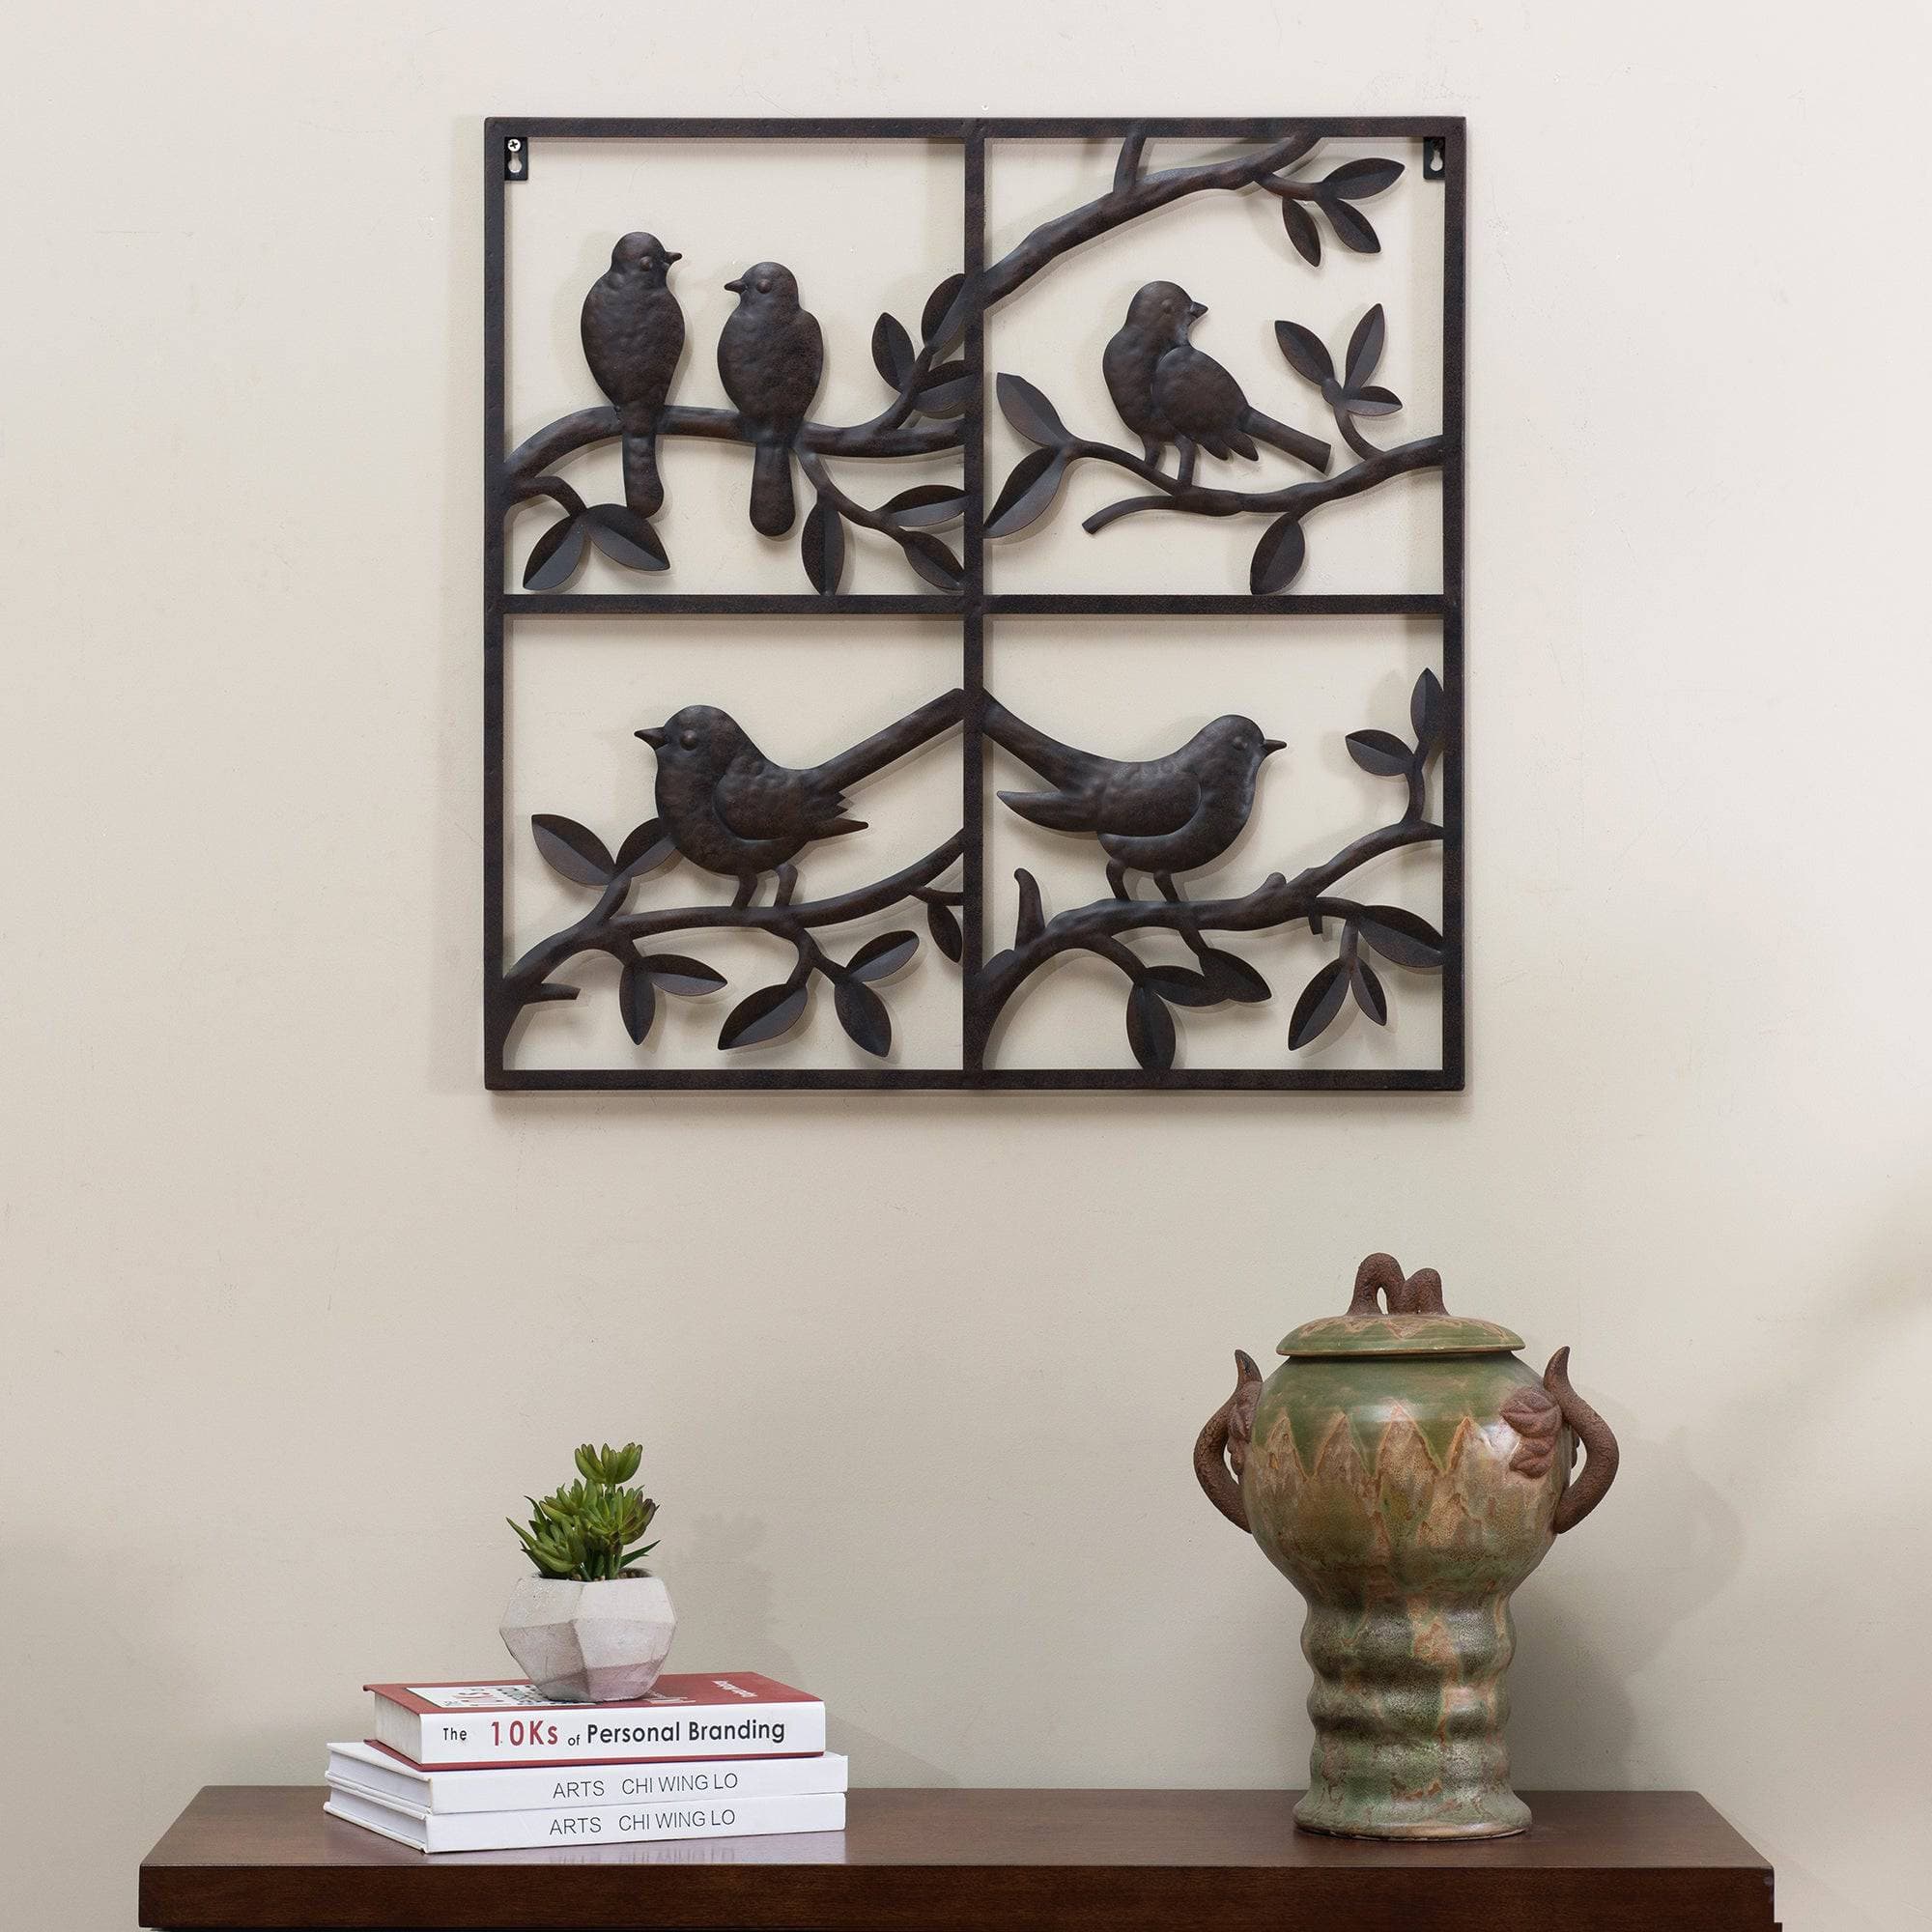 Sunjoy Copper Designed with Birds on Branches Wall Decor with Screw-Hangers